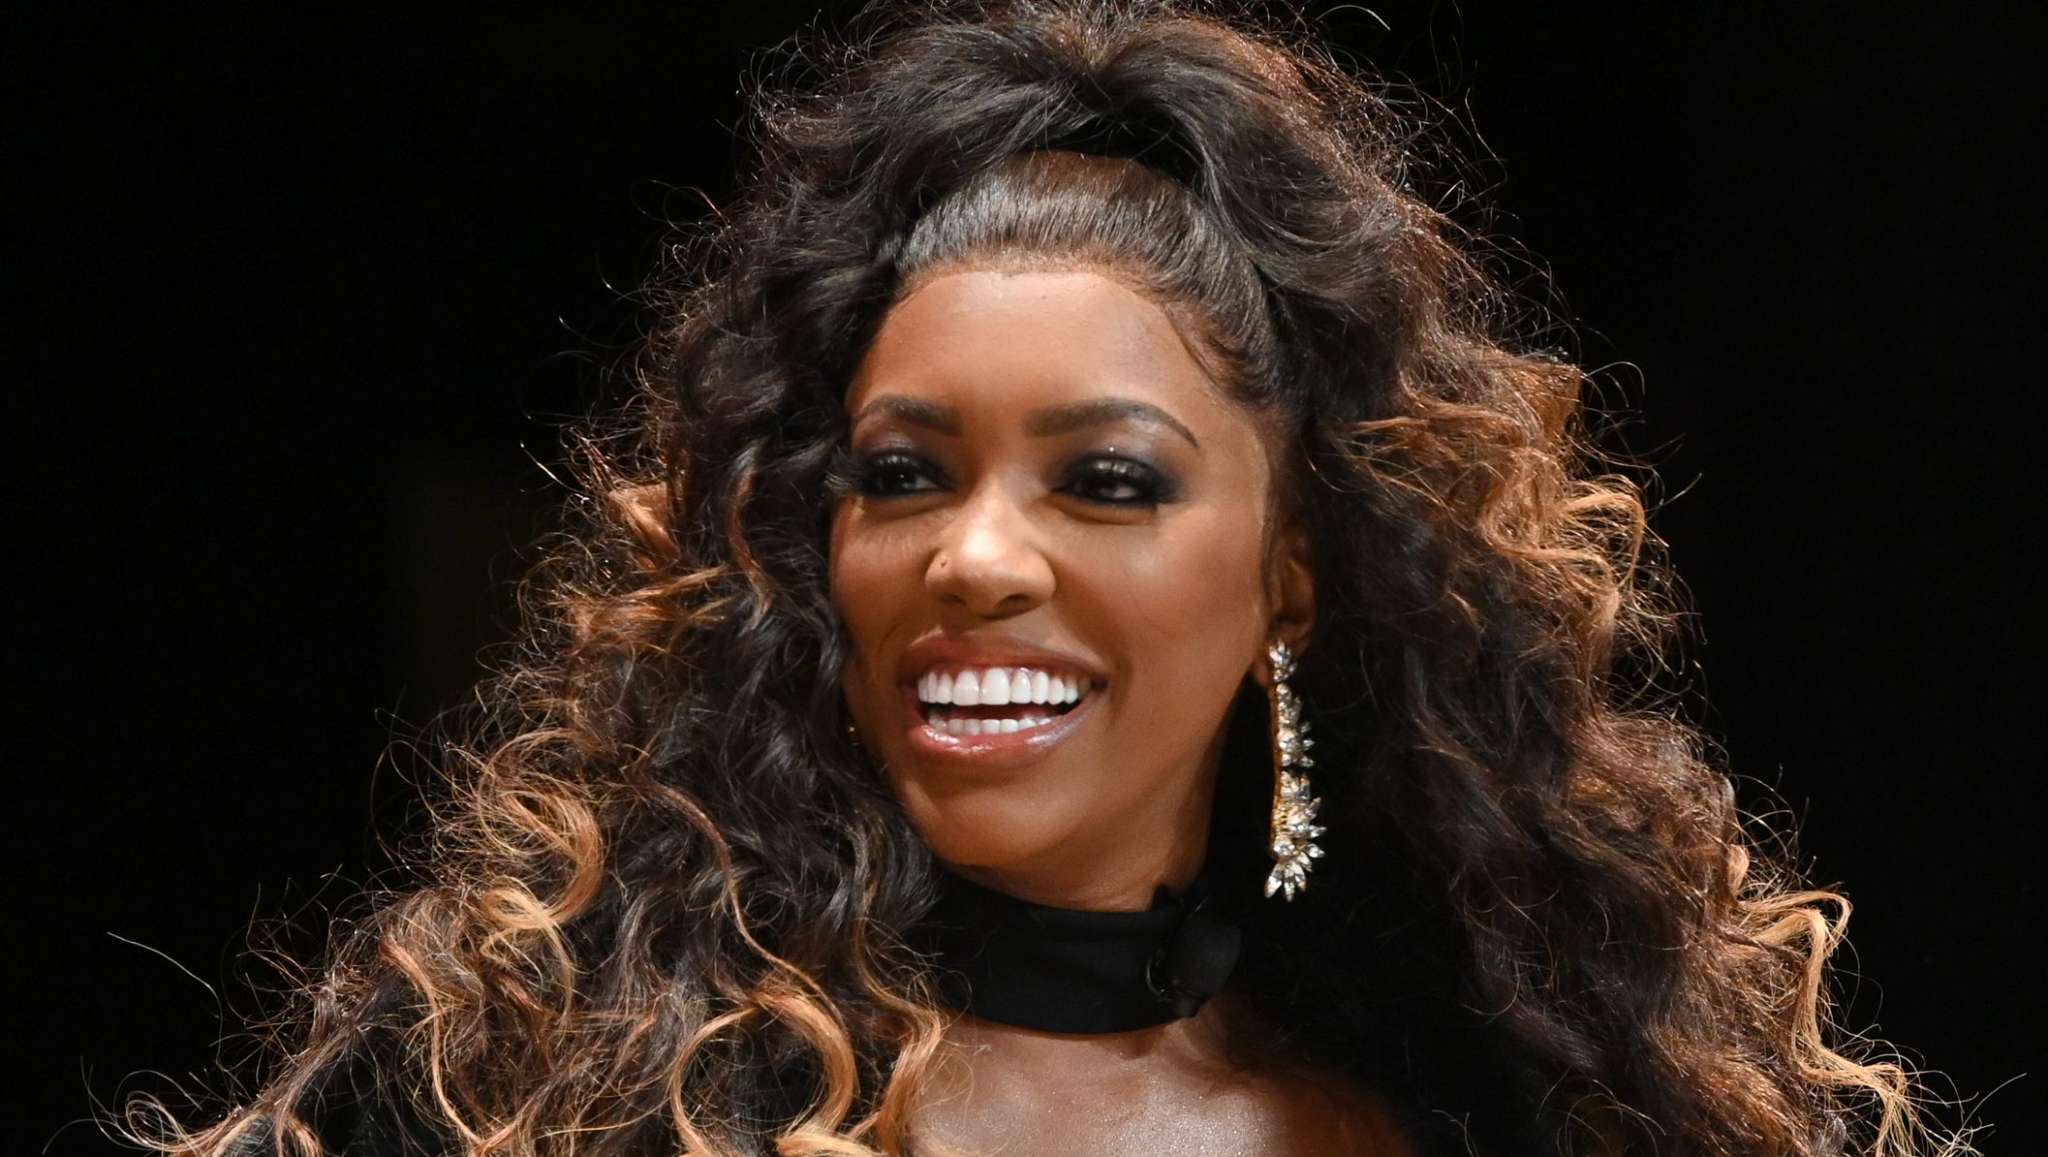 Porsha Williams Celebrated Her Bestie And Showed Her Gratitude For Walking Together With Her On The Journey Called Life